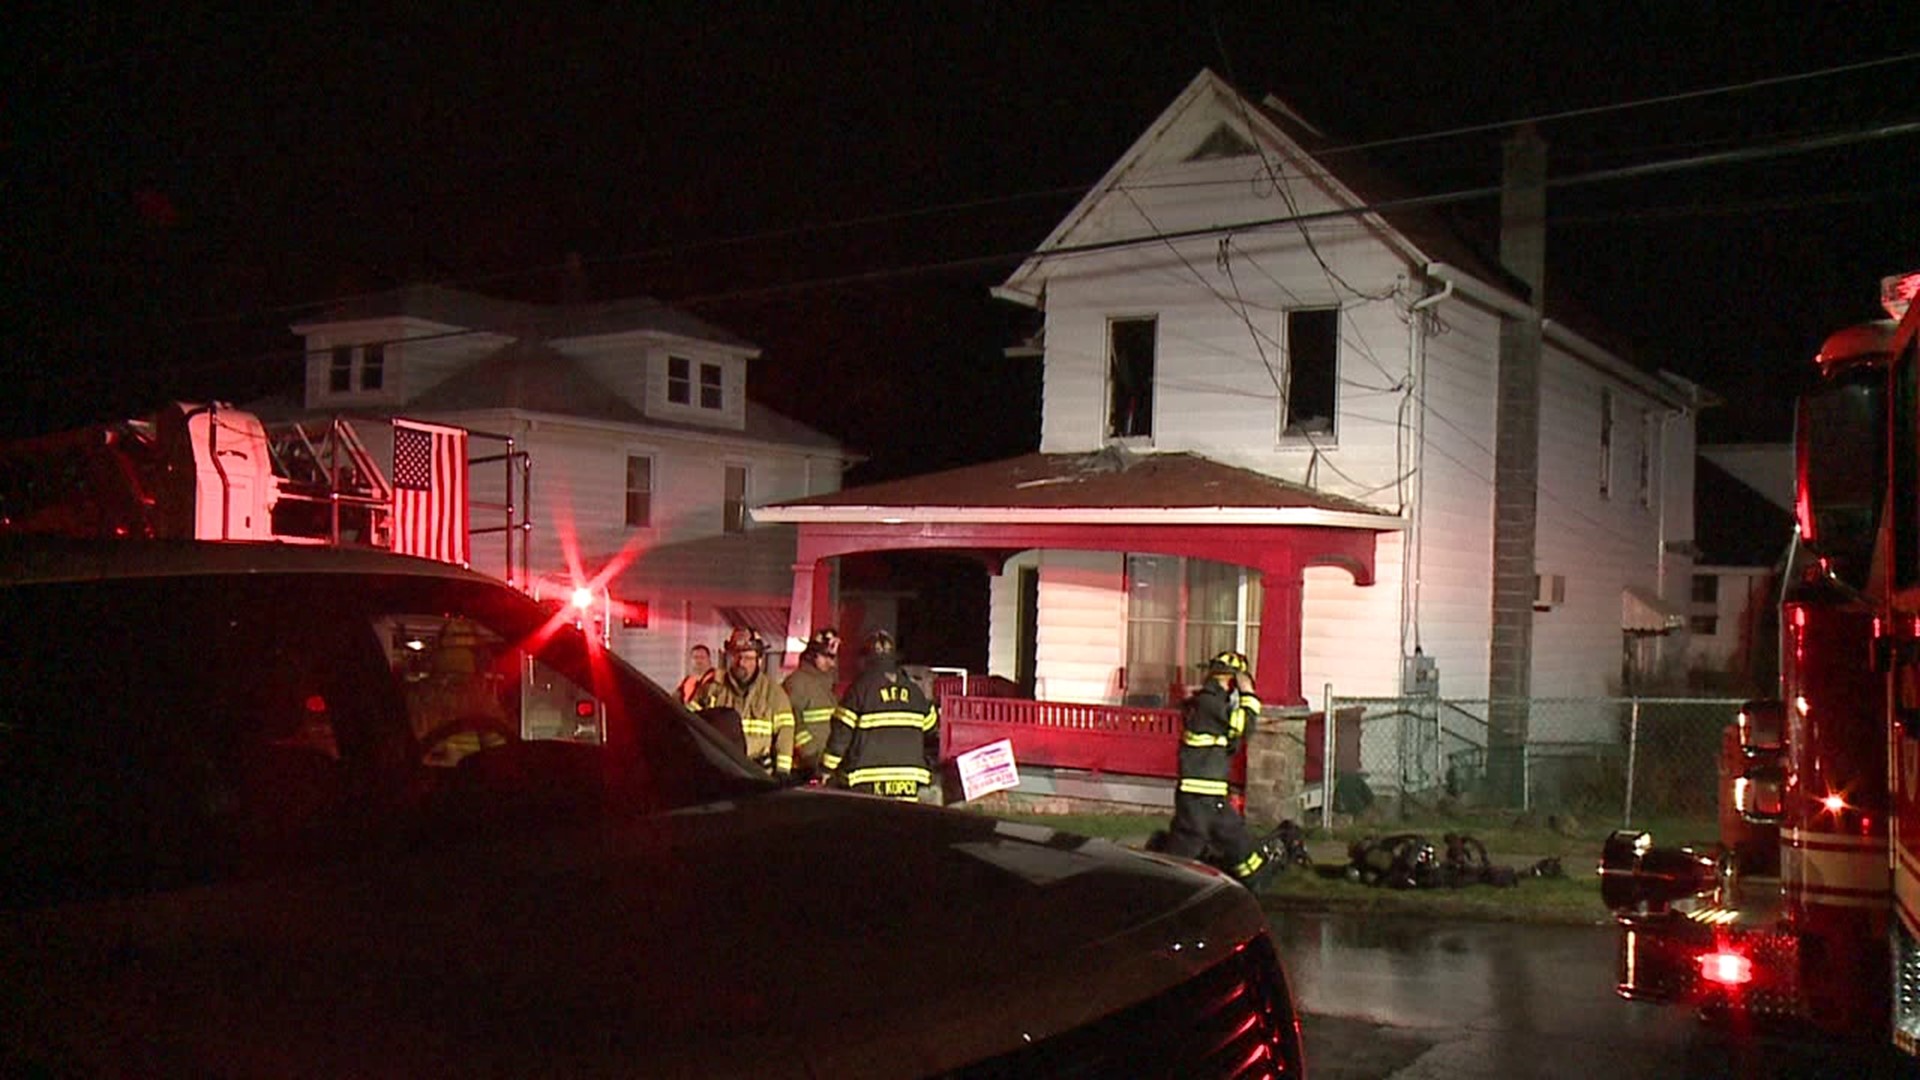 Flames broke out around 10 p.m. Saturday night along East Union Street in Nanticoke.